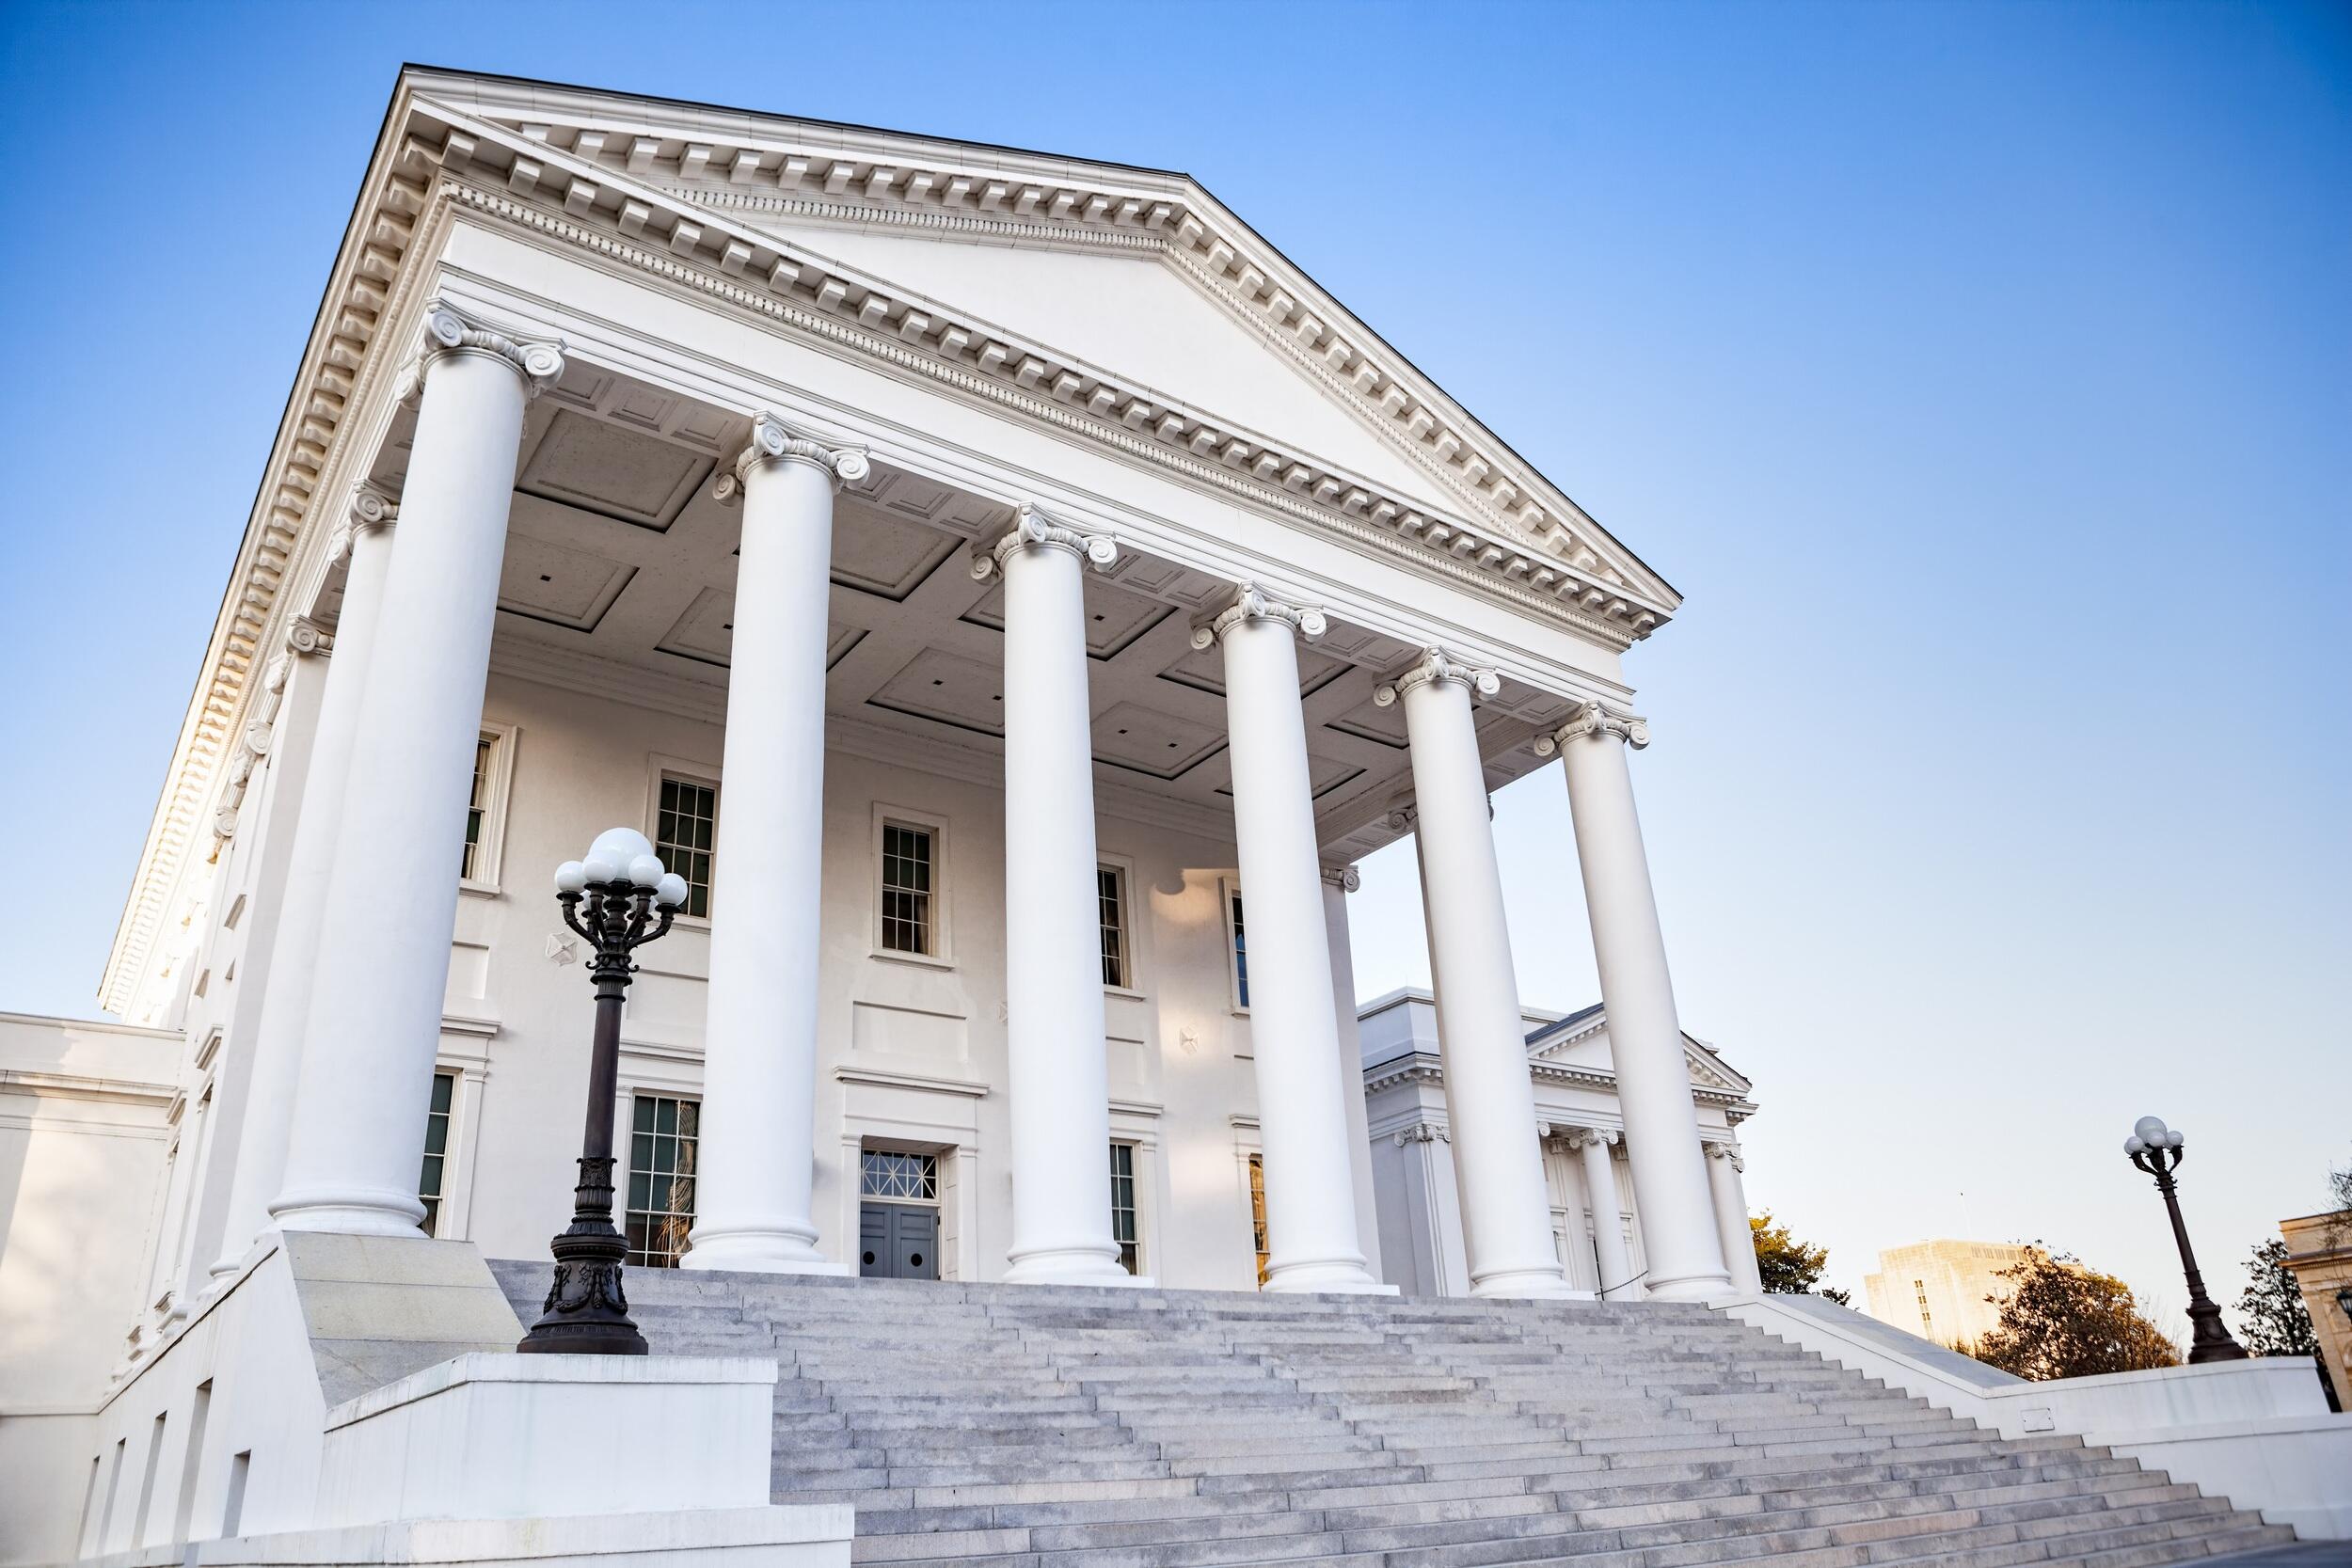 The Virginia state capitol building facing its southern facade with tall columns and a wide staircase.